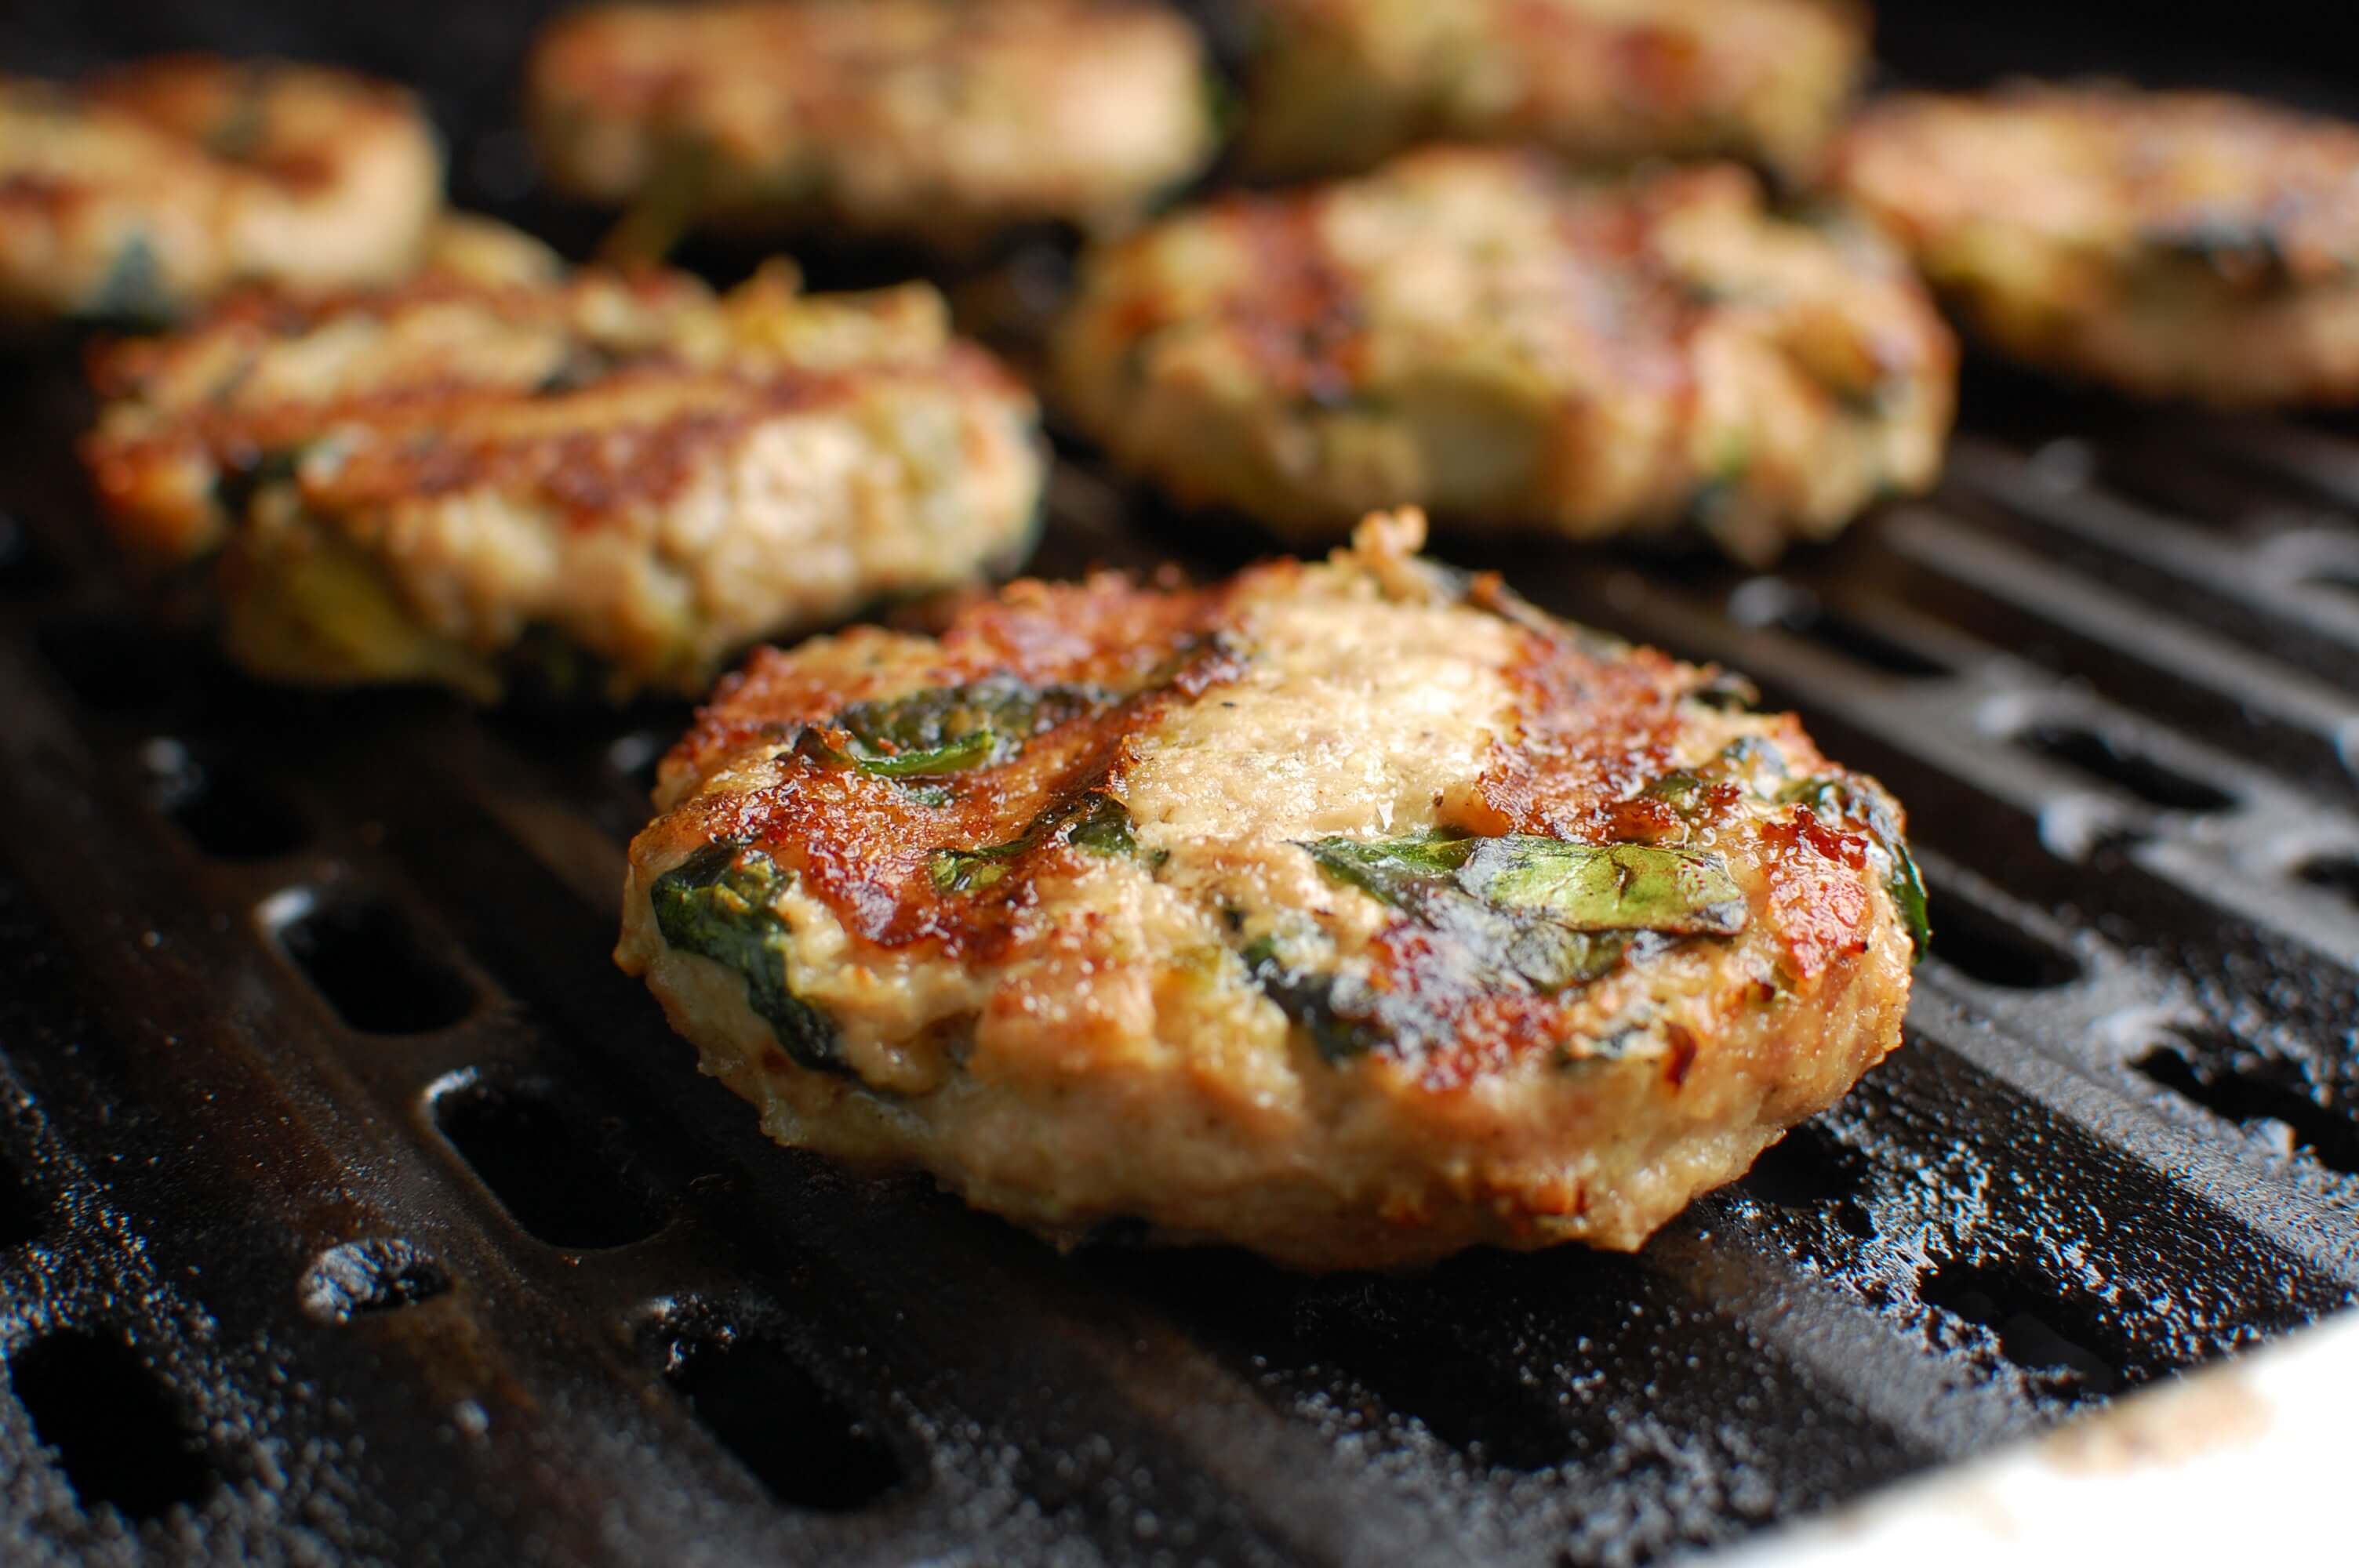 20 Meal Ideas Your Clients Can Grill This Summer: Spinach & Artichoke Turkey Burgers with Roasted Tomato Mayo